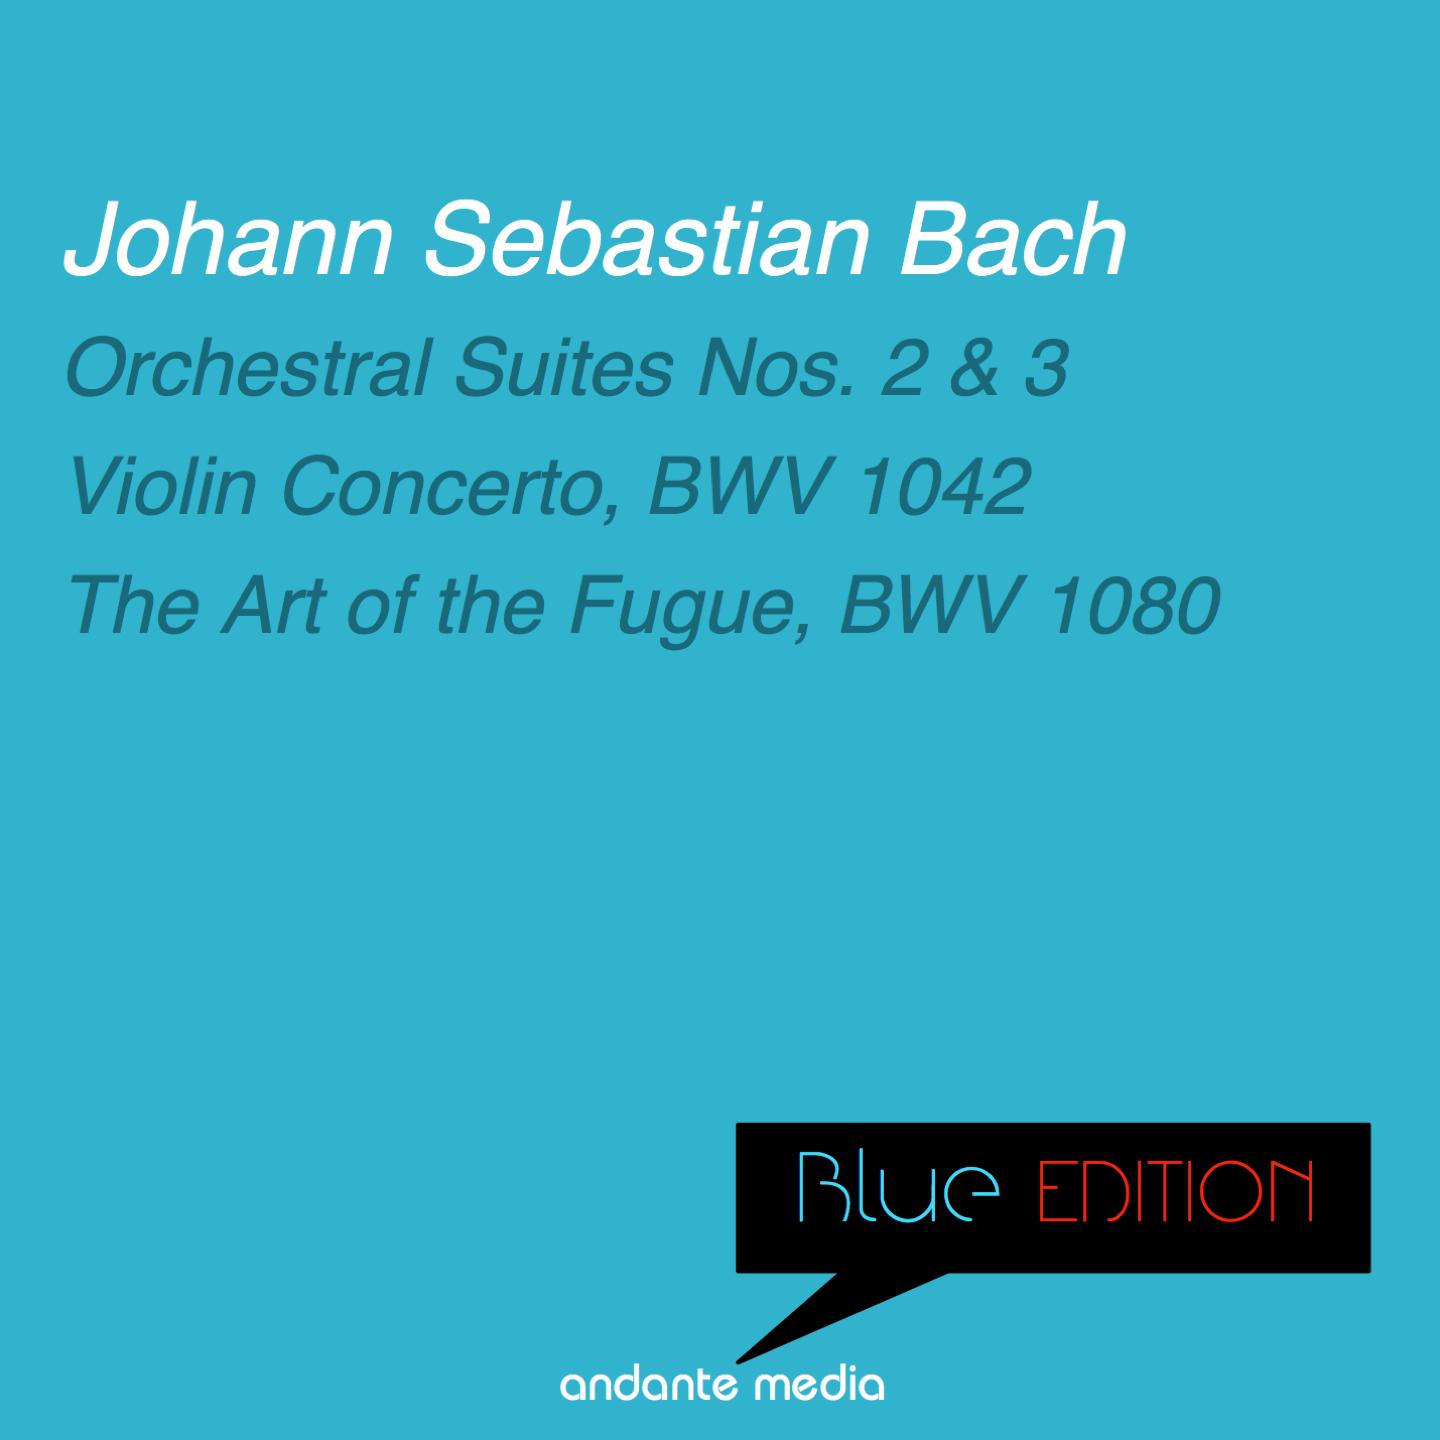 Orchestral Suite No. 2 in B Minor, BWV 1067: Ouverture